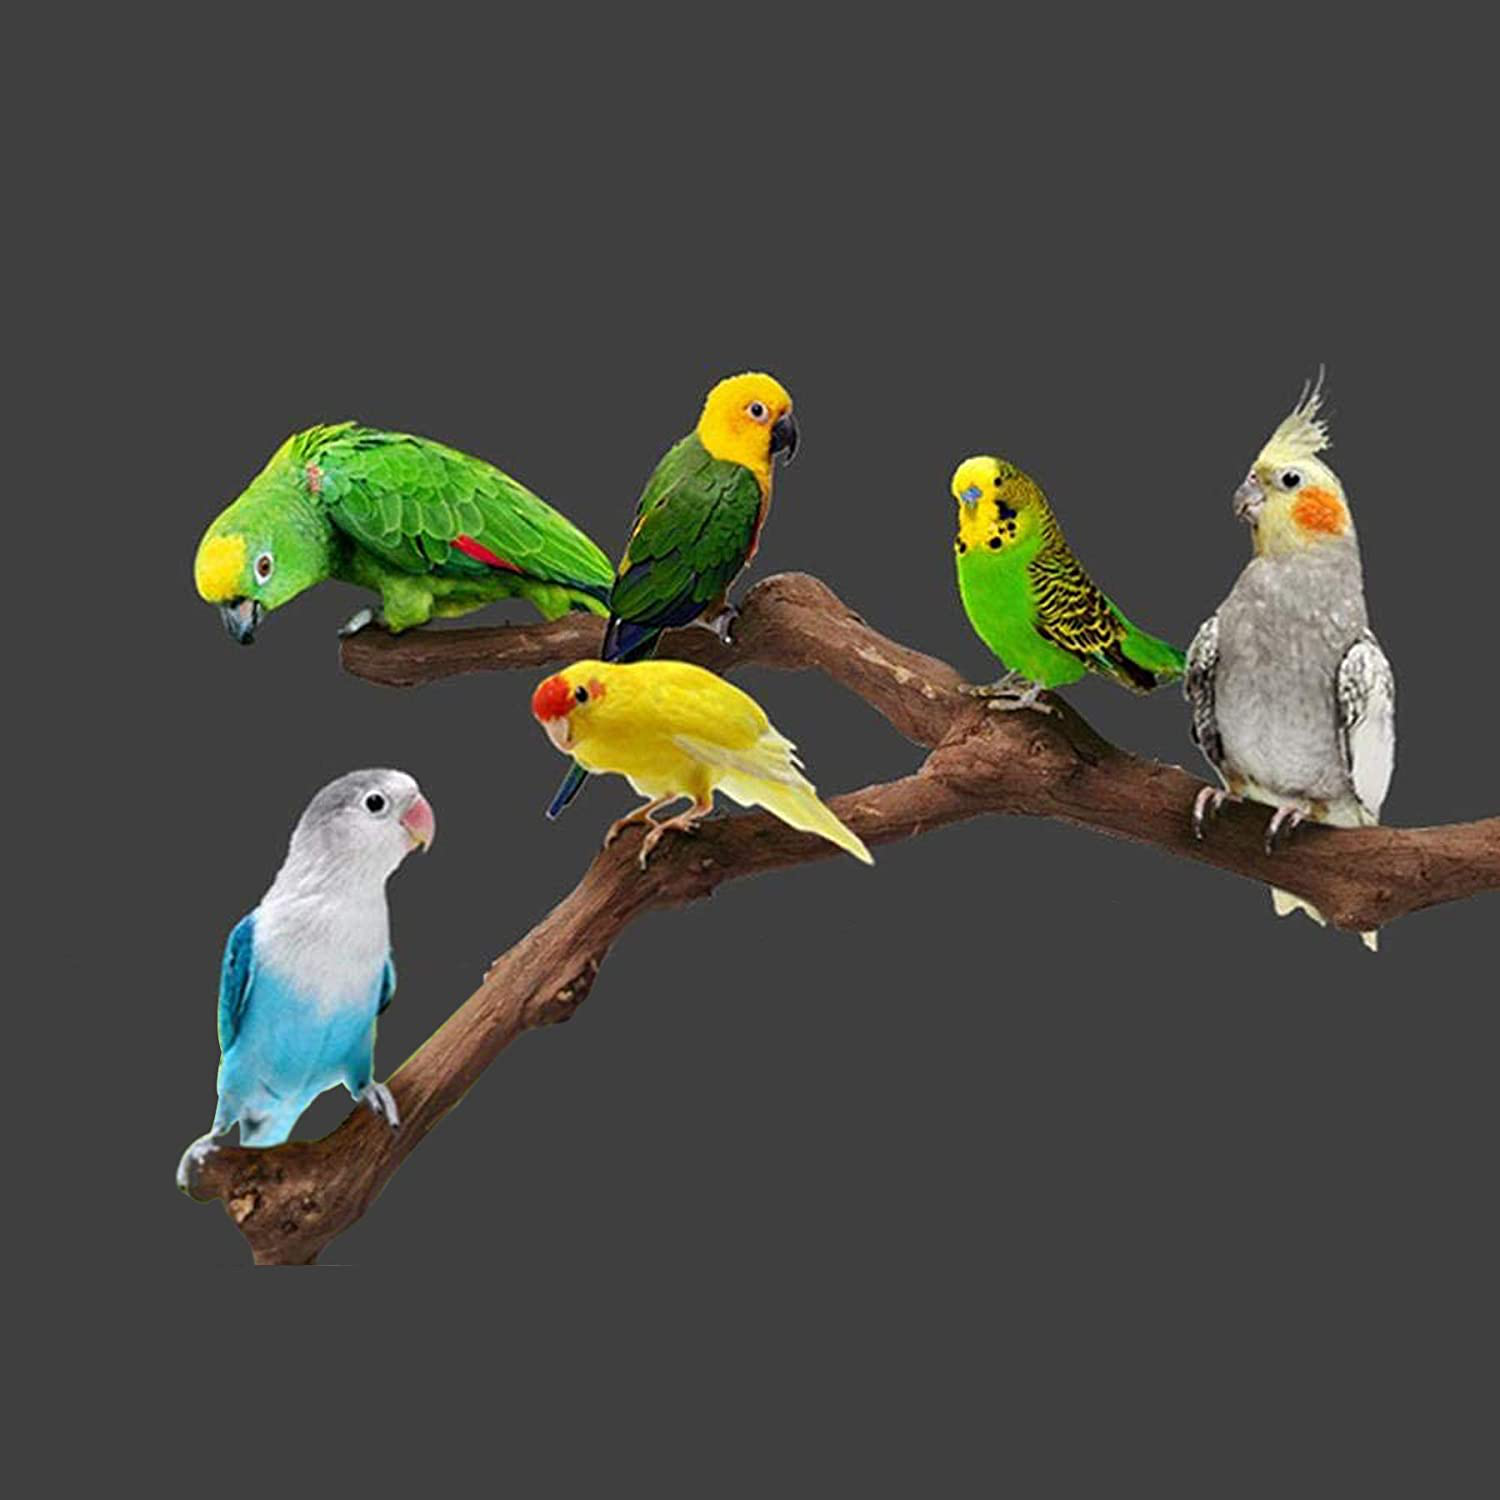 Seasonsky 5 PCS Bird Perch Natural Grape Stick Bird Standing Stick Swing Chewing Bird Toys Natural Grapevine Bird Cage Perch for Parrot Cages Toy for Cockatiels, Parakeets, Finches Animals & Pet Supplies > Pet Supplies > Bird Supplies > Bird Toys Seasonsky   